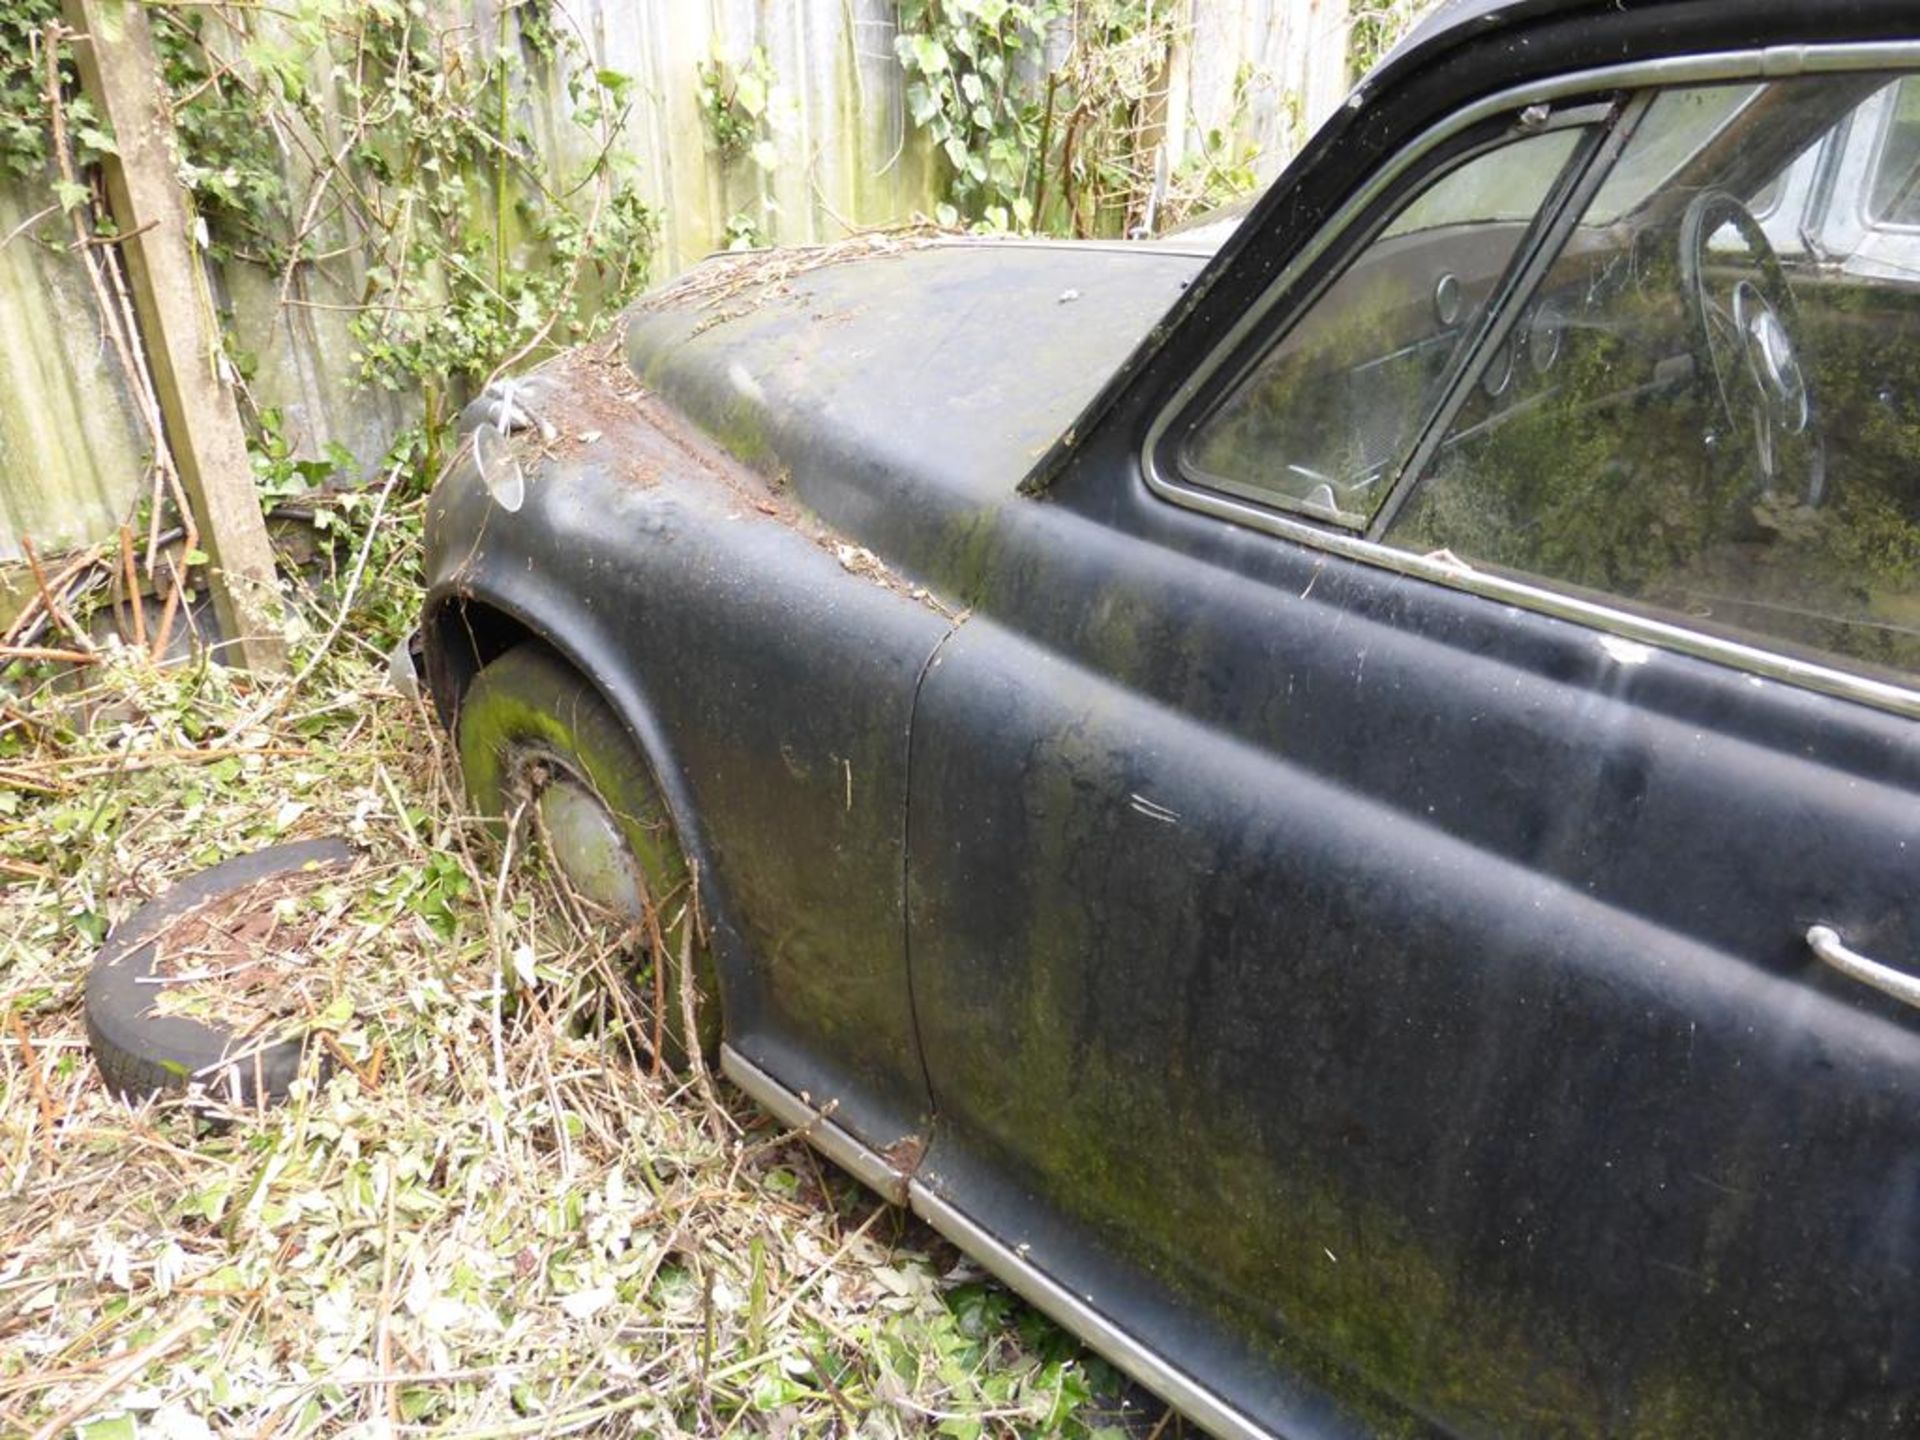 A Rover P4 (in need of restoration) - Image 11 of 15